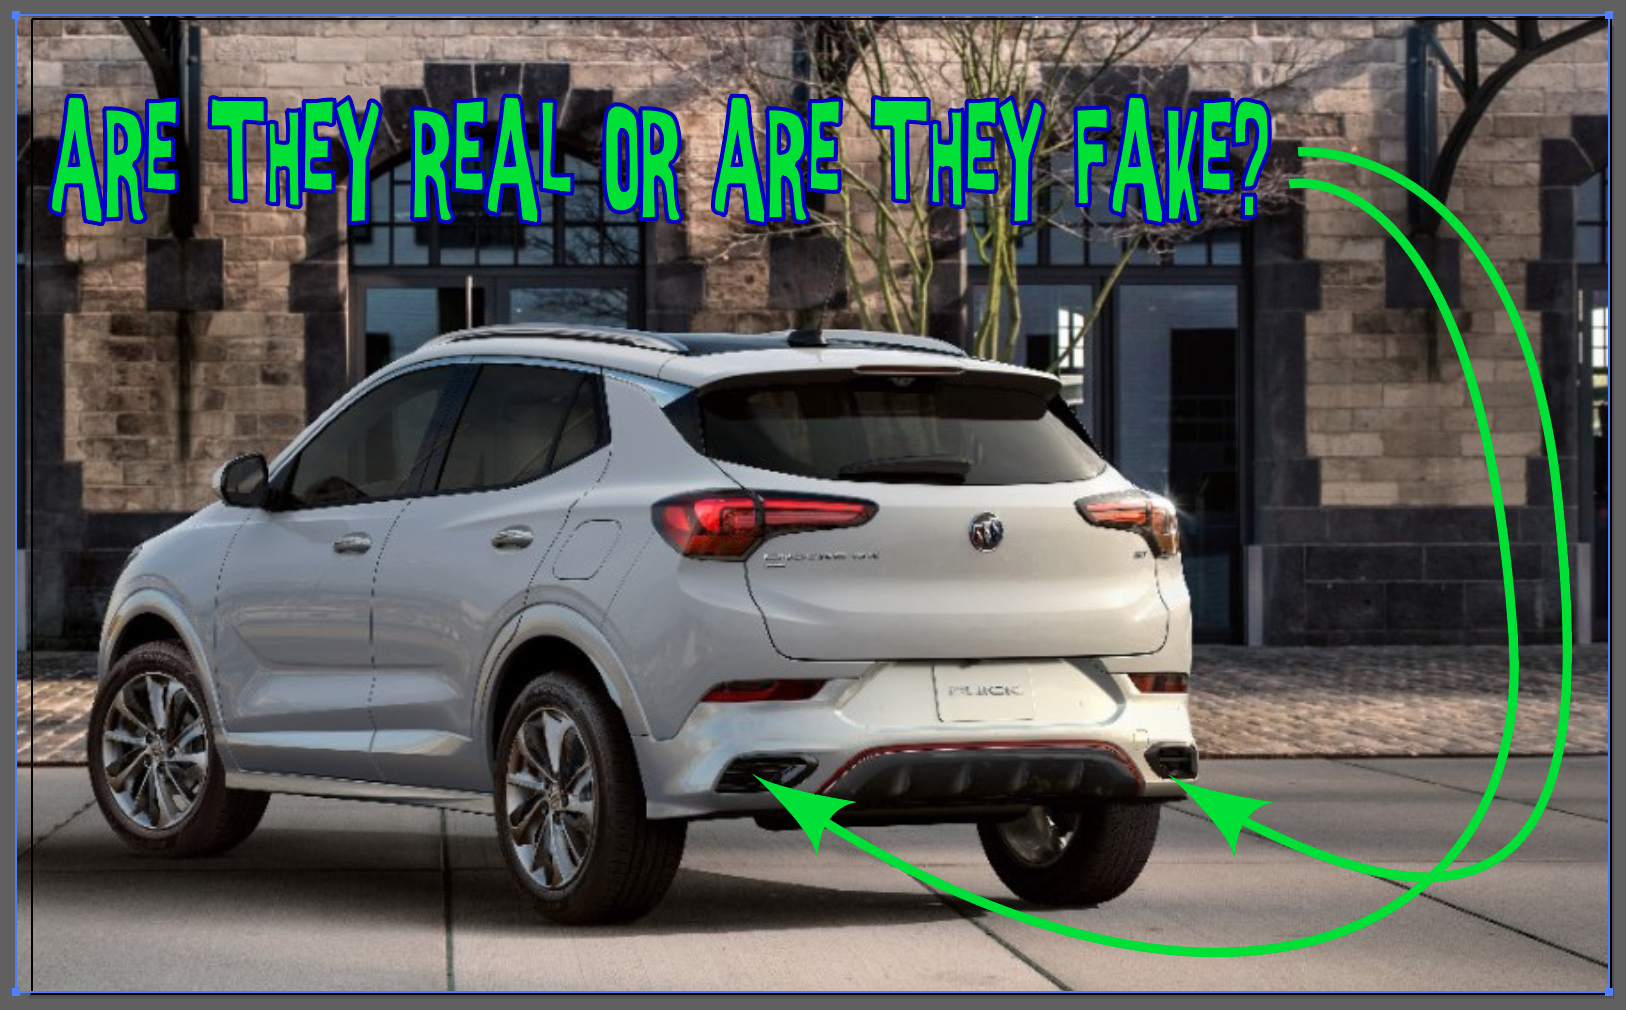 2021 Buick Encore showing exhaust are they real or are they fake?